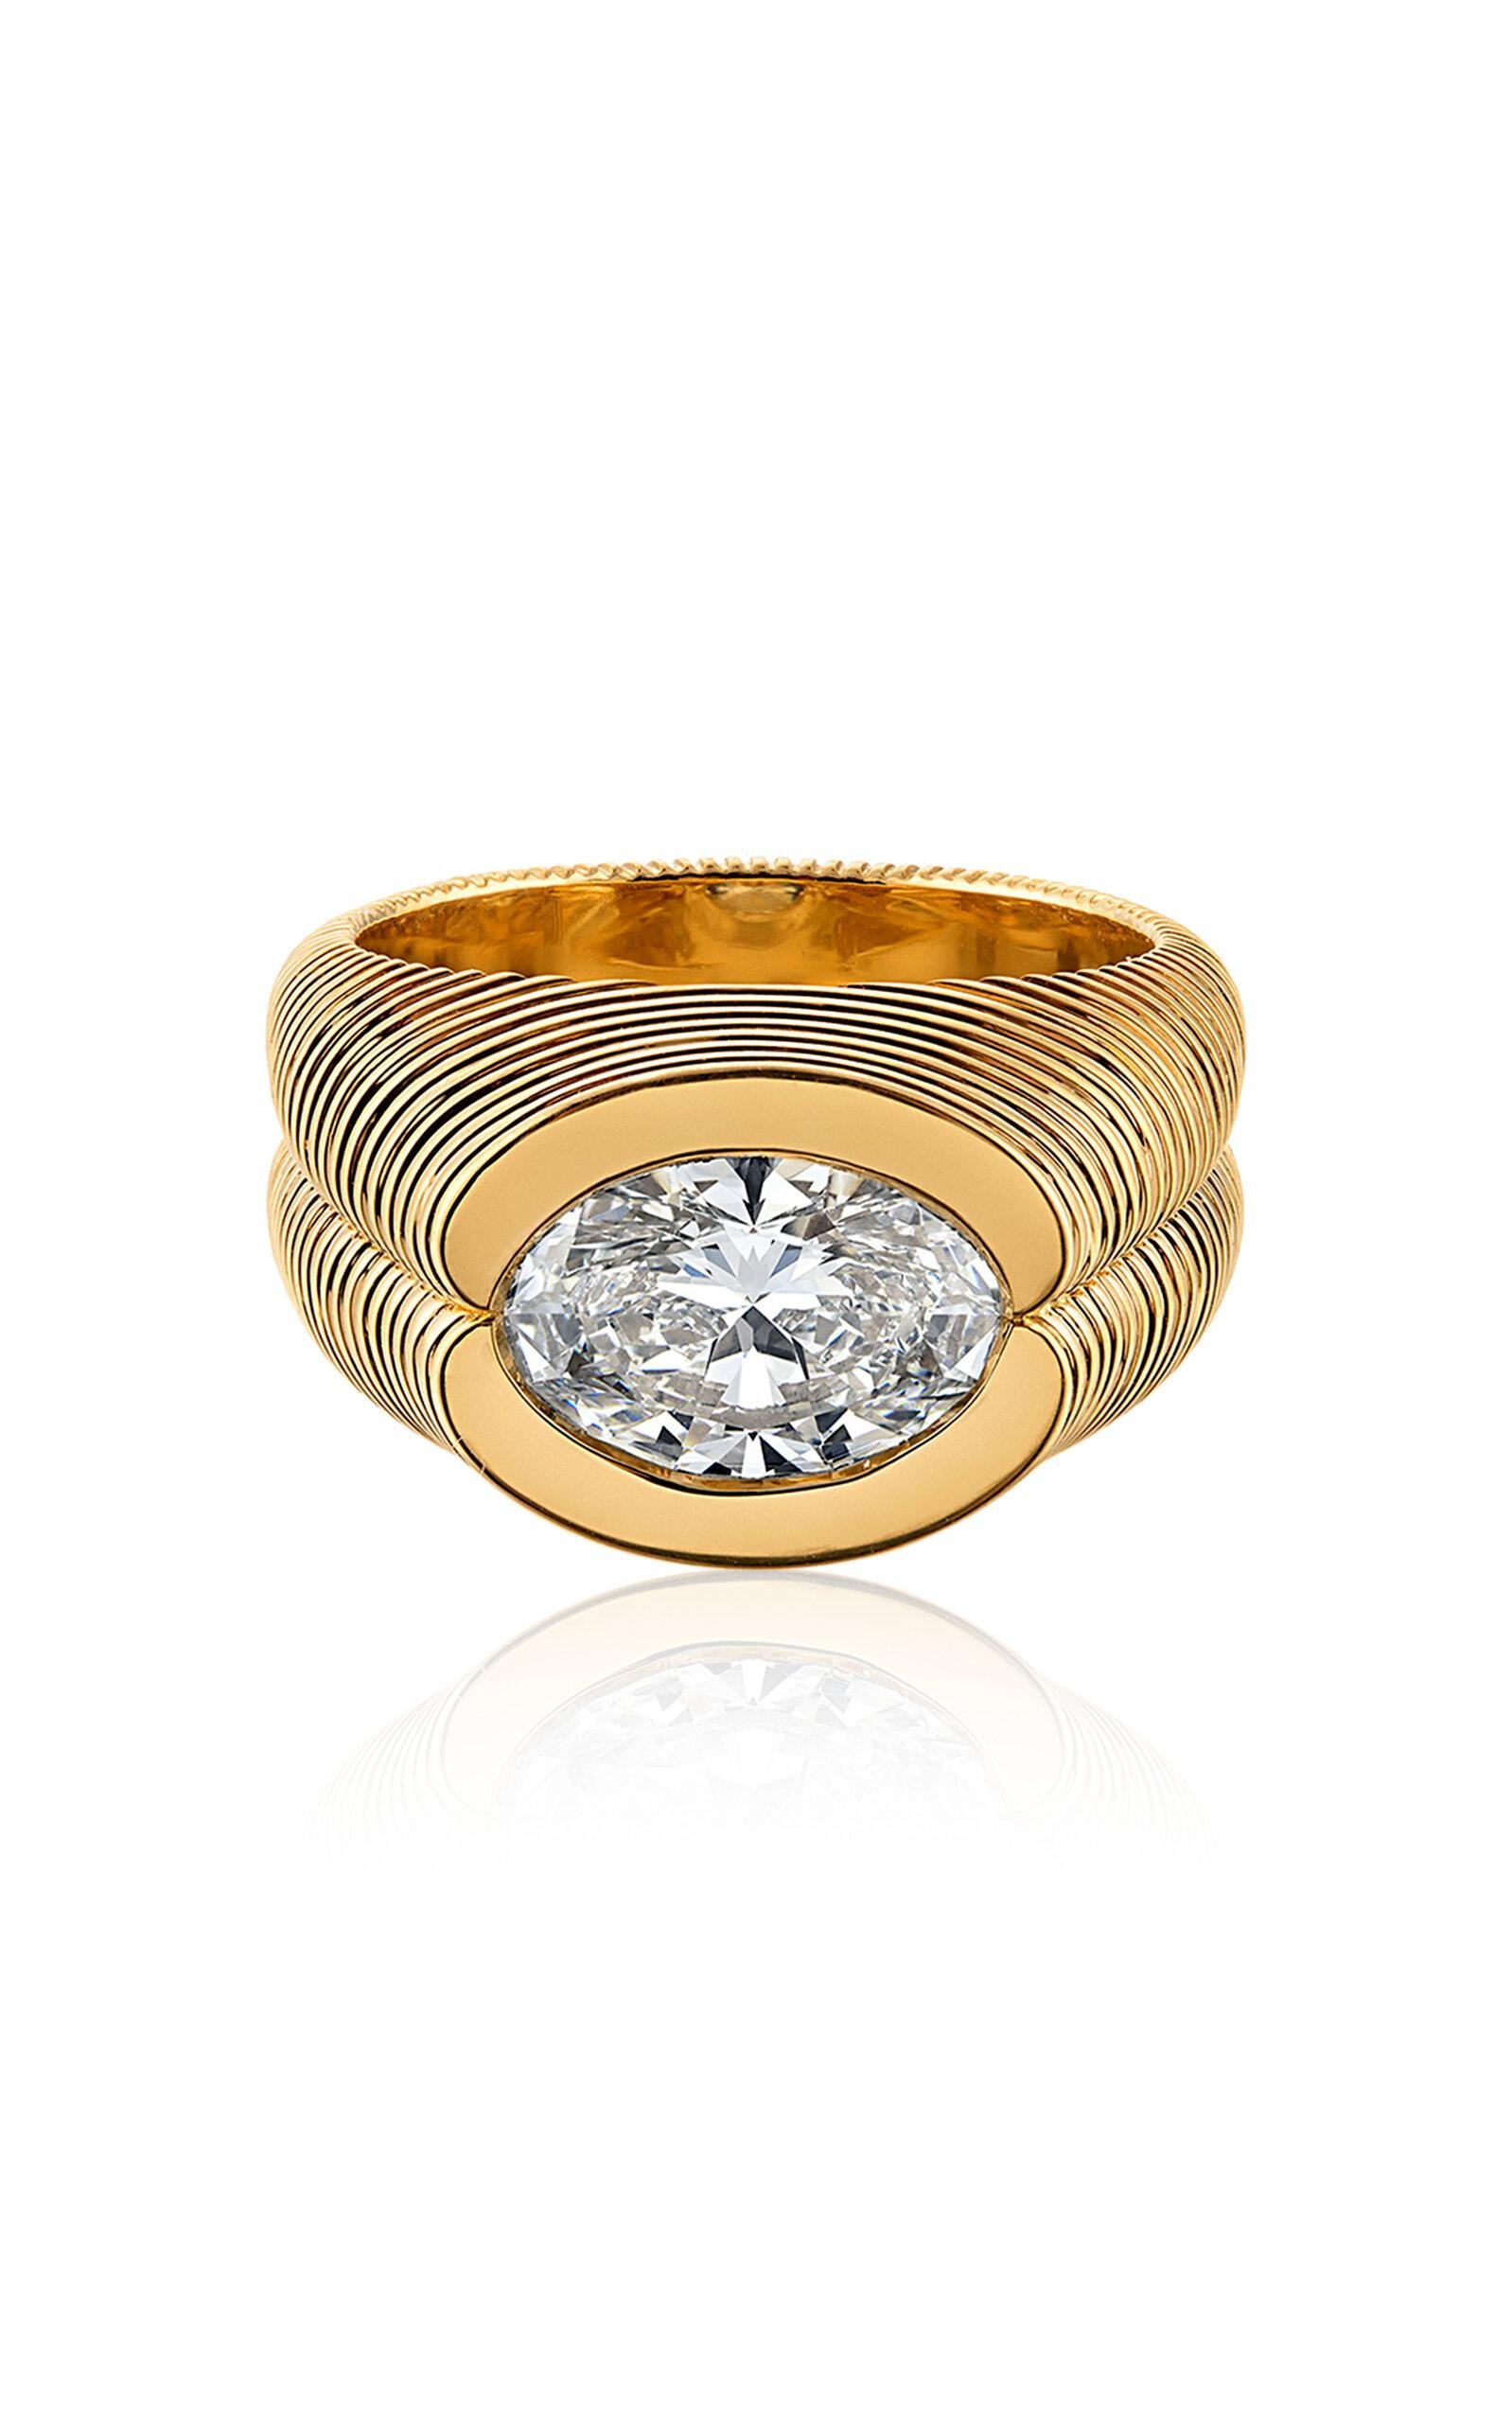 Erede - 18k Yellow Gold Delta Signet Ring - Gold - US 6 - Only At Moda Operandi - Gifts For Her by EREDE